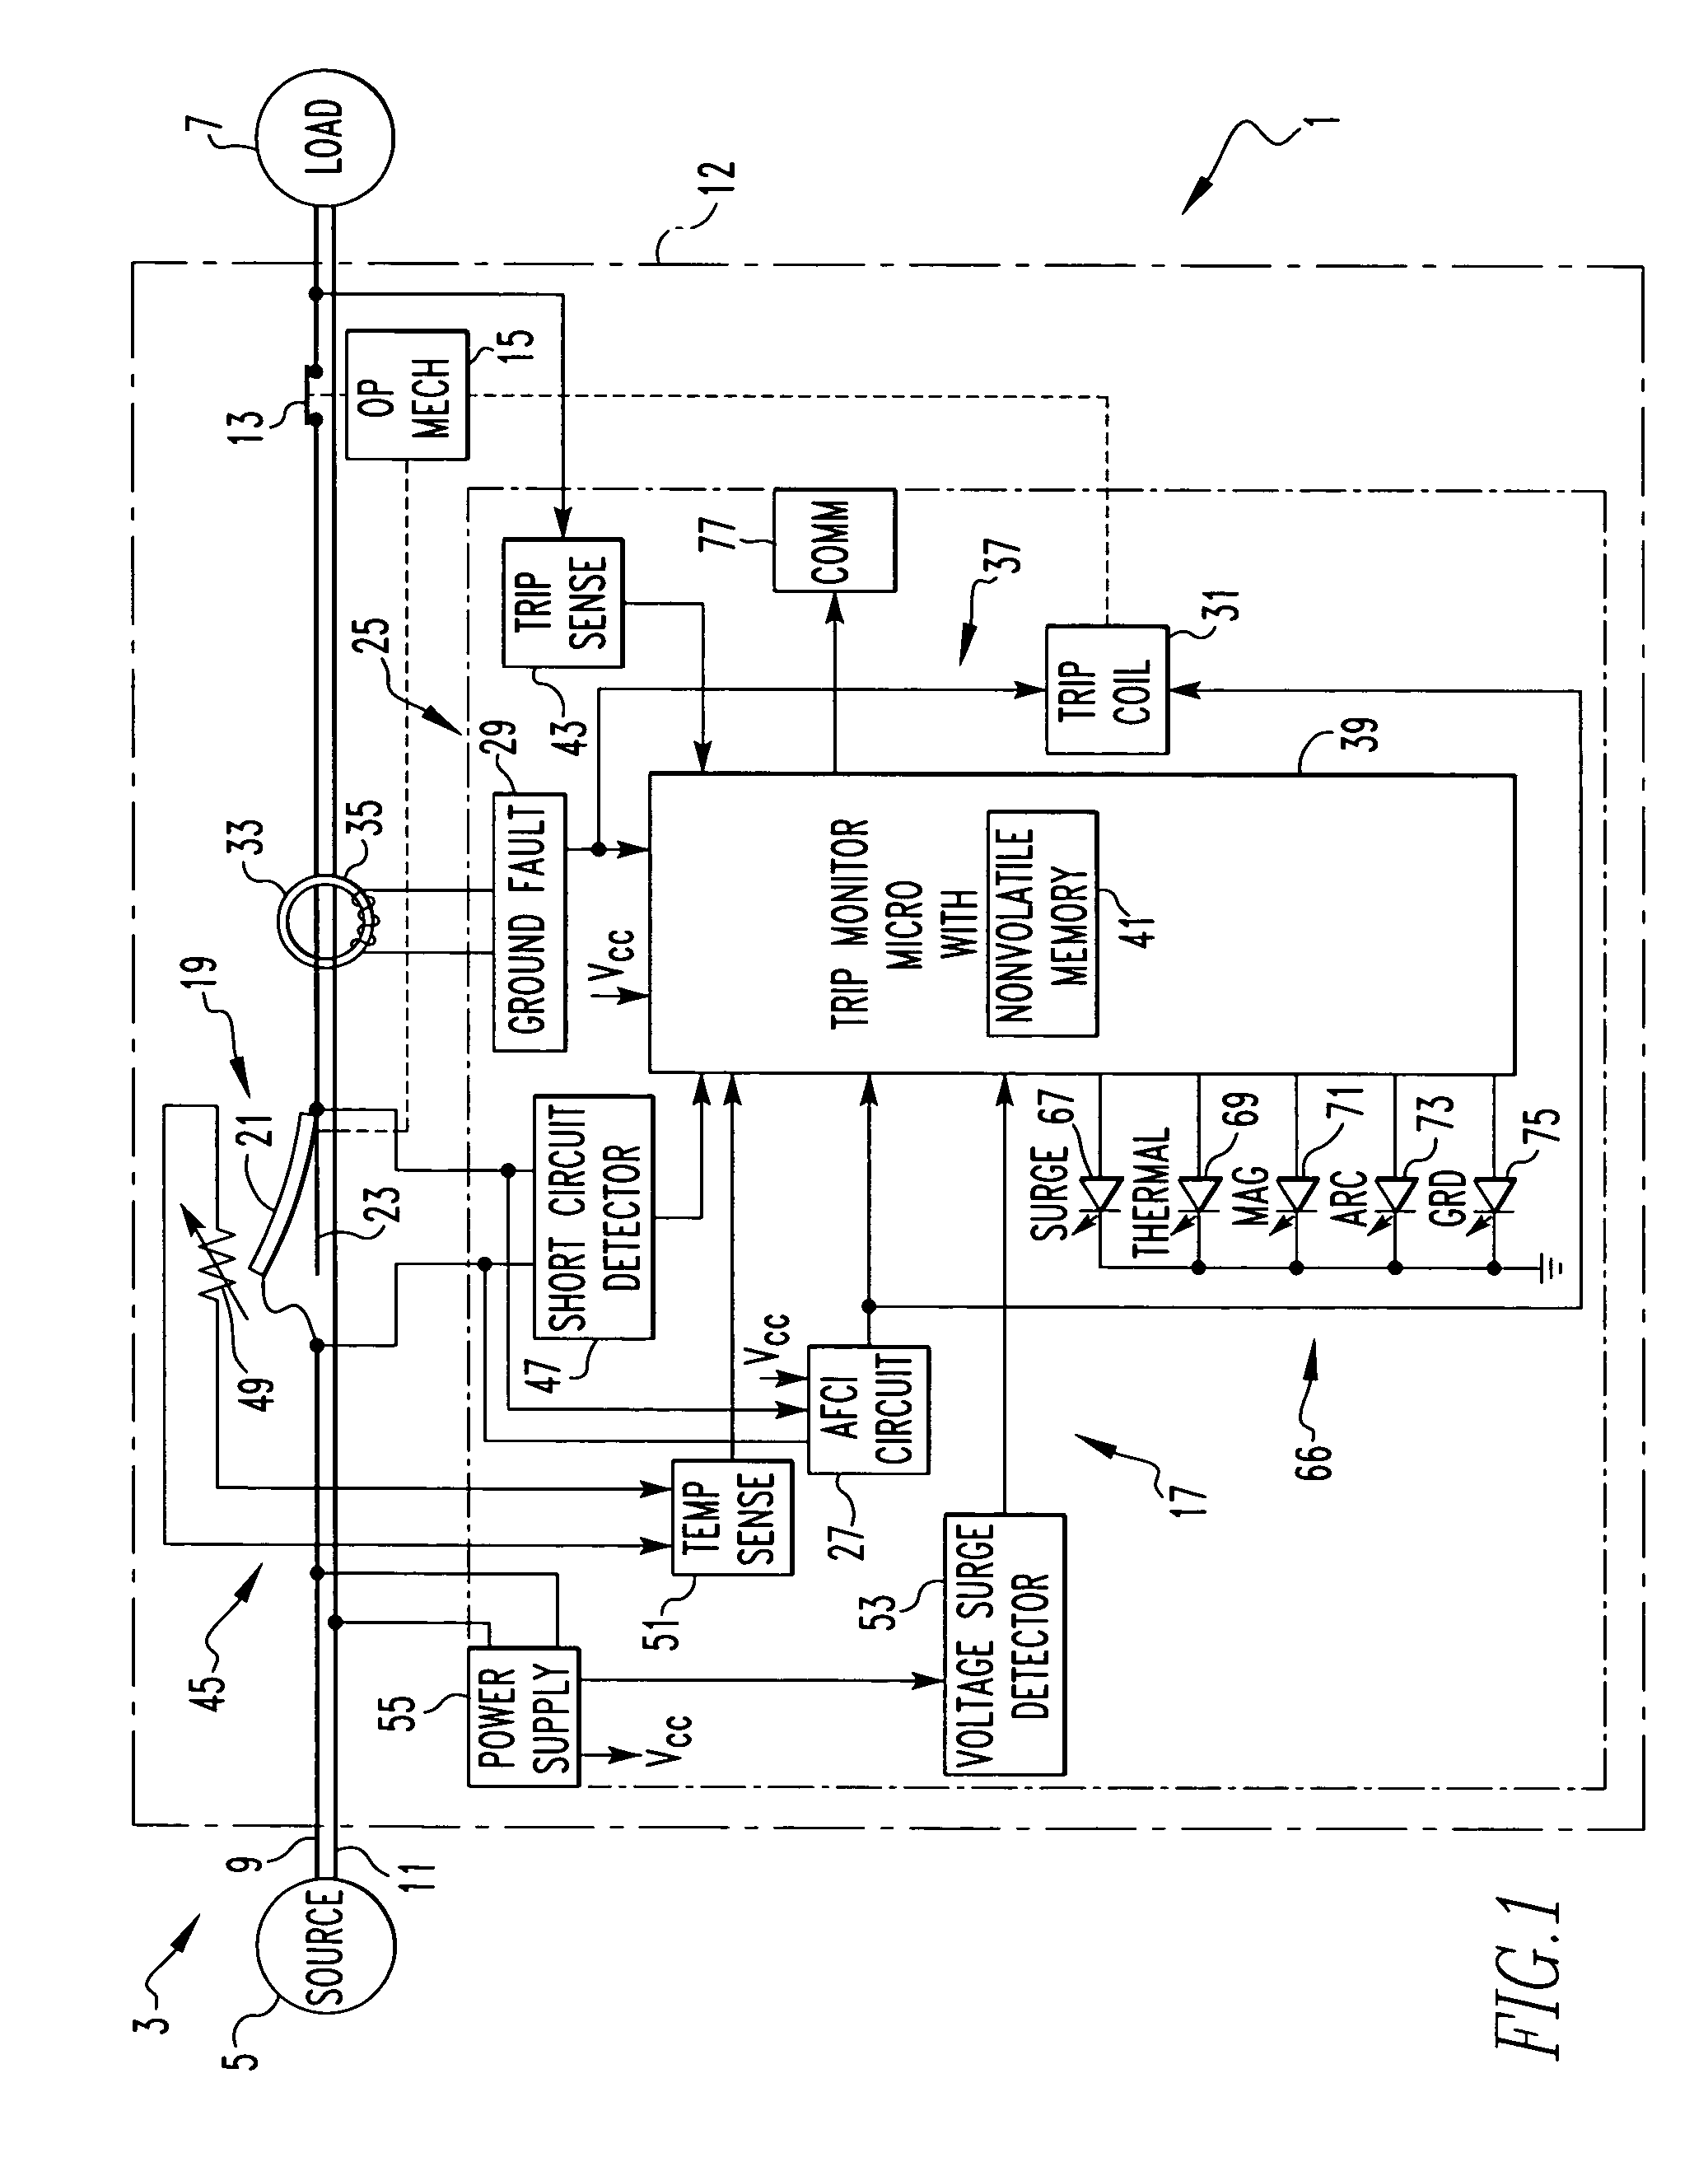 Monitor providing cause of trip indication and circuit breaker incorporating the same